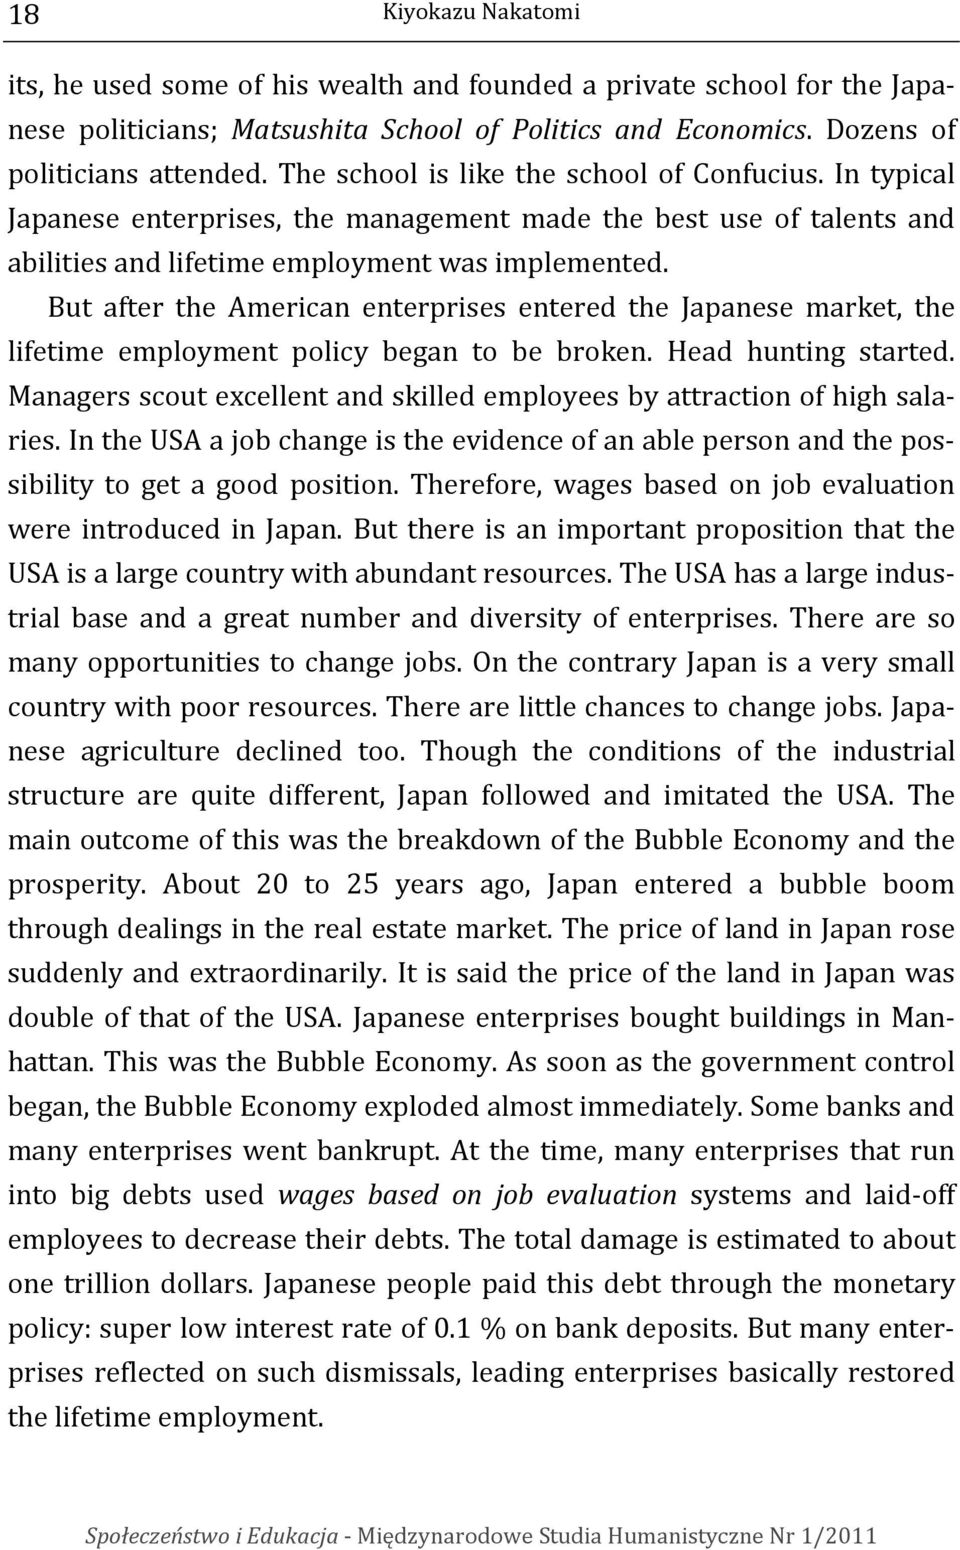 But after the American enterprises entered the Japanese market, the lifetime employment policy began to be broken. Head hunting started.